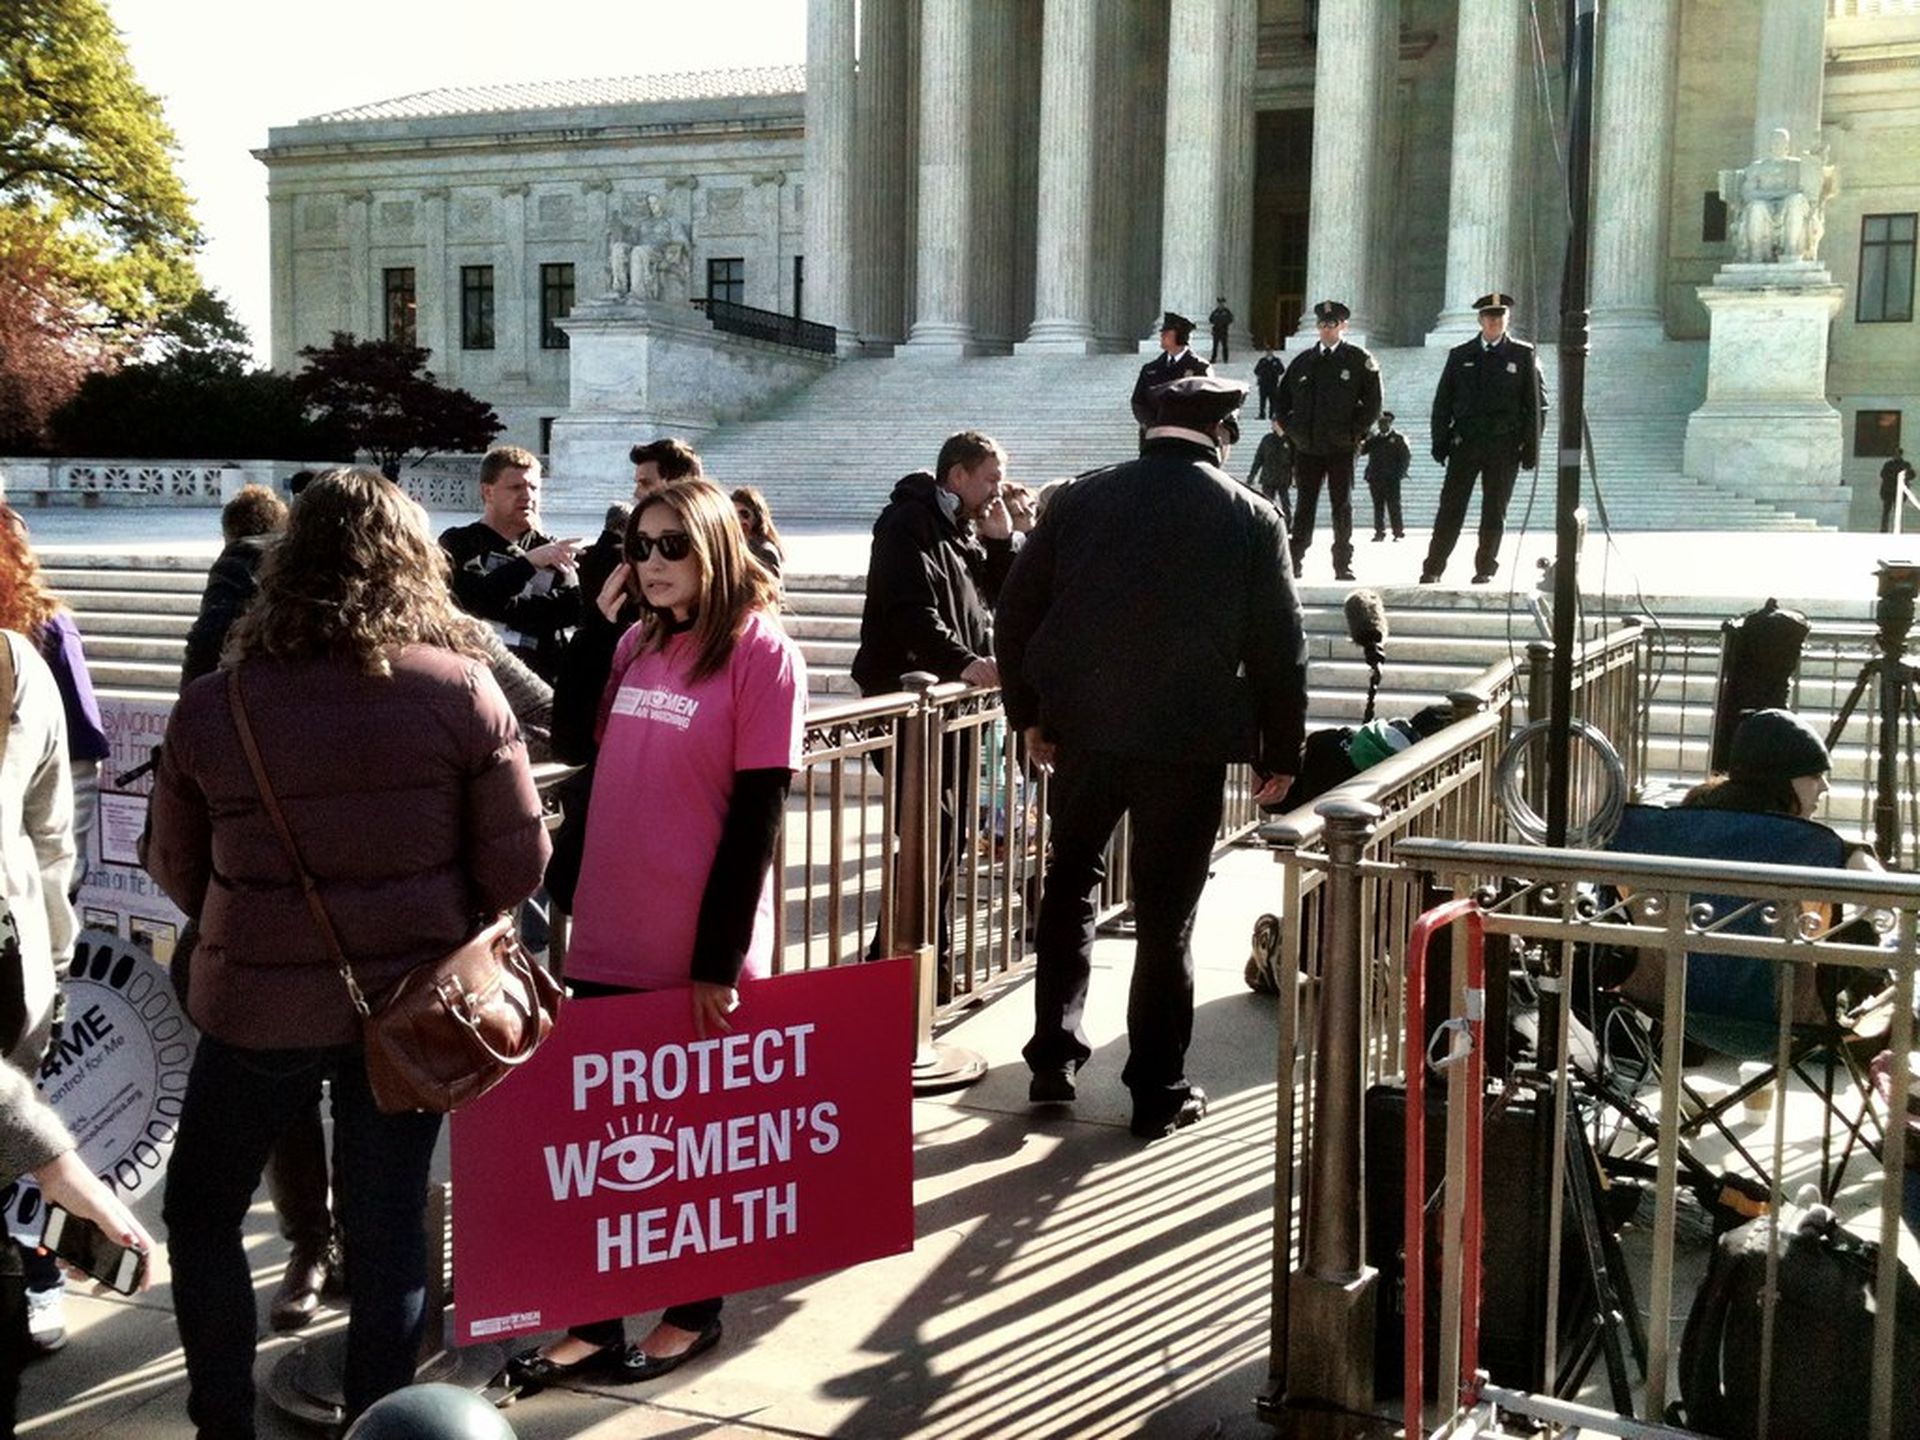 The FTC is being urged to investigate the data collection practices of Apple and Google to protect the safety and privacy of women, after the overturn of Roe v. Wade. (Photo credit: &#8220;Women&#8217;s Health at the Supreme Court&#8221; by LaDawna&#8217;s pics is licensed under CC BY 2.0.)